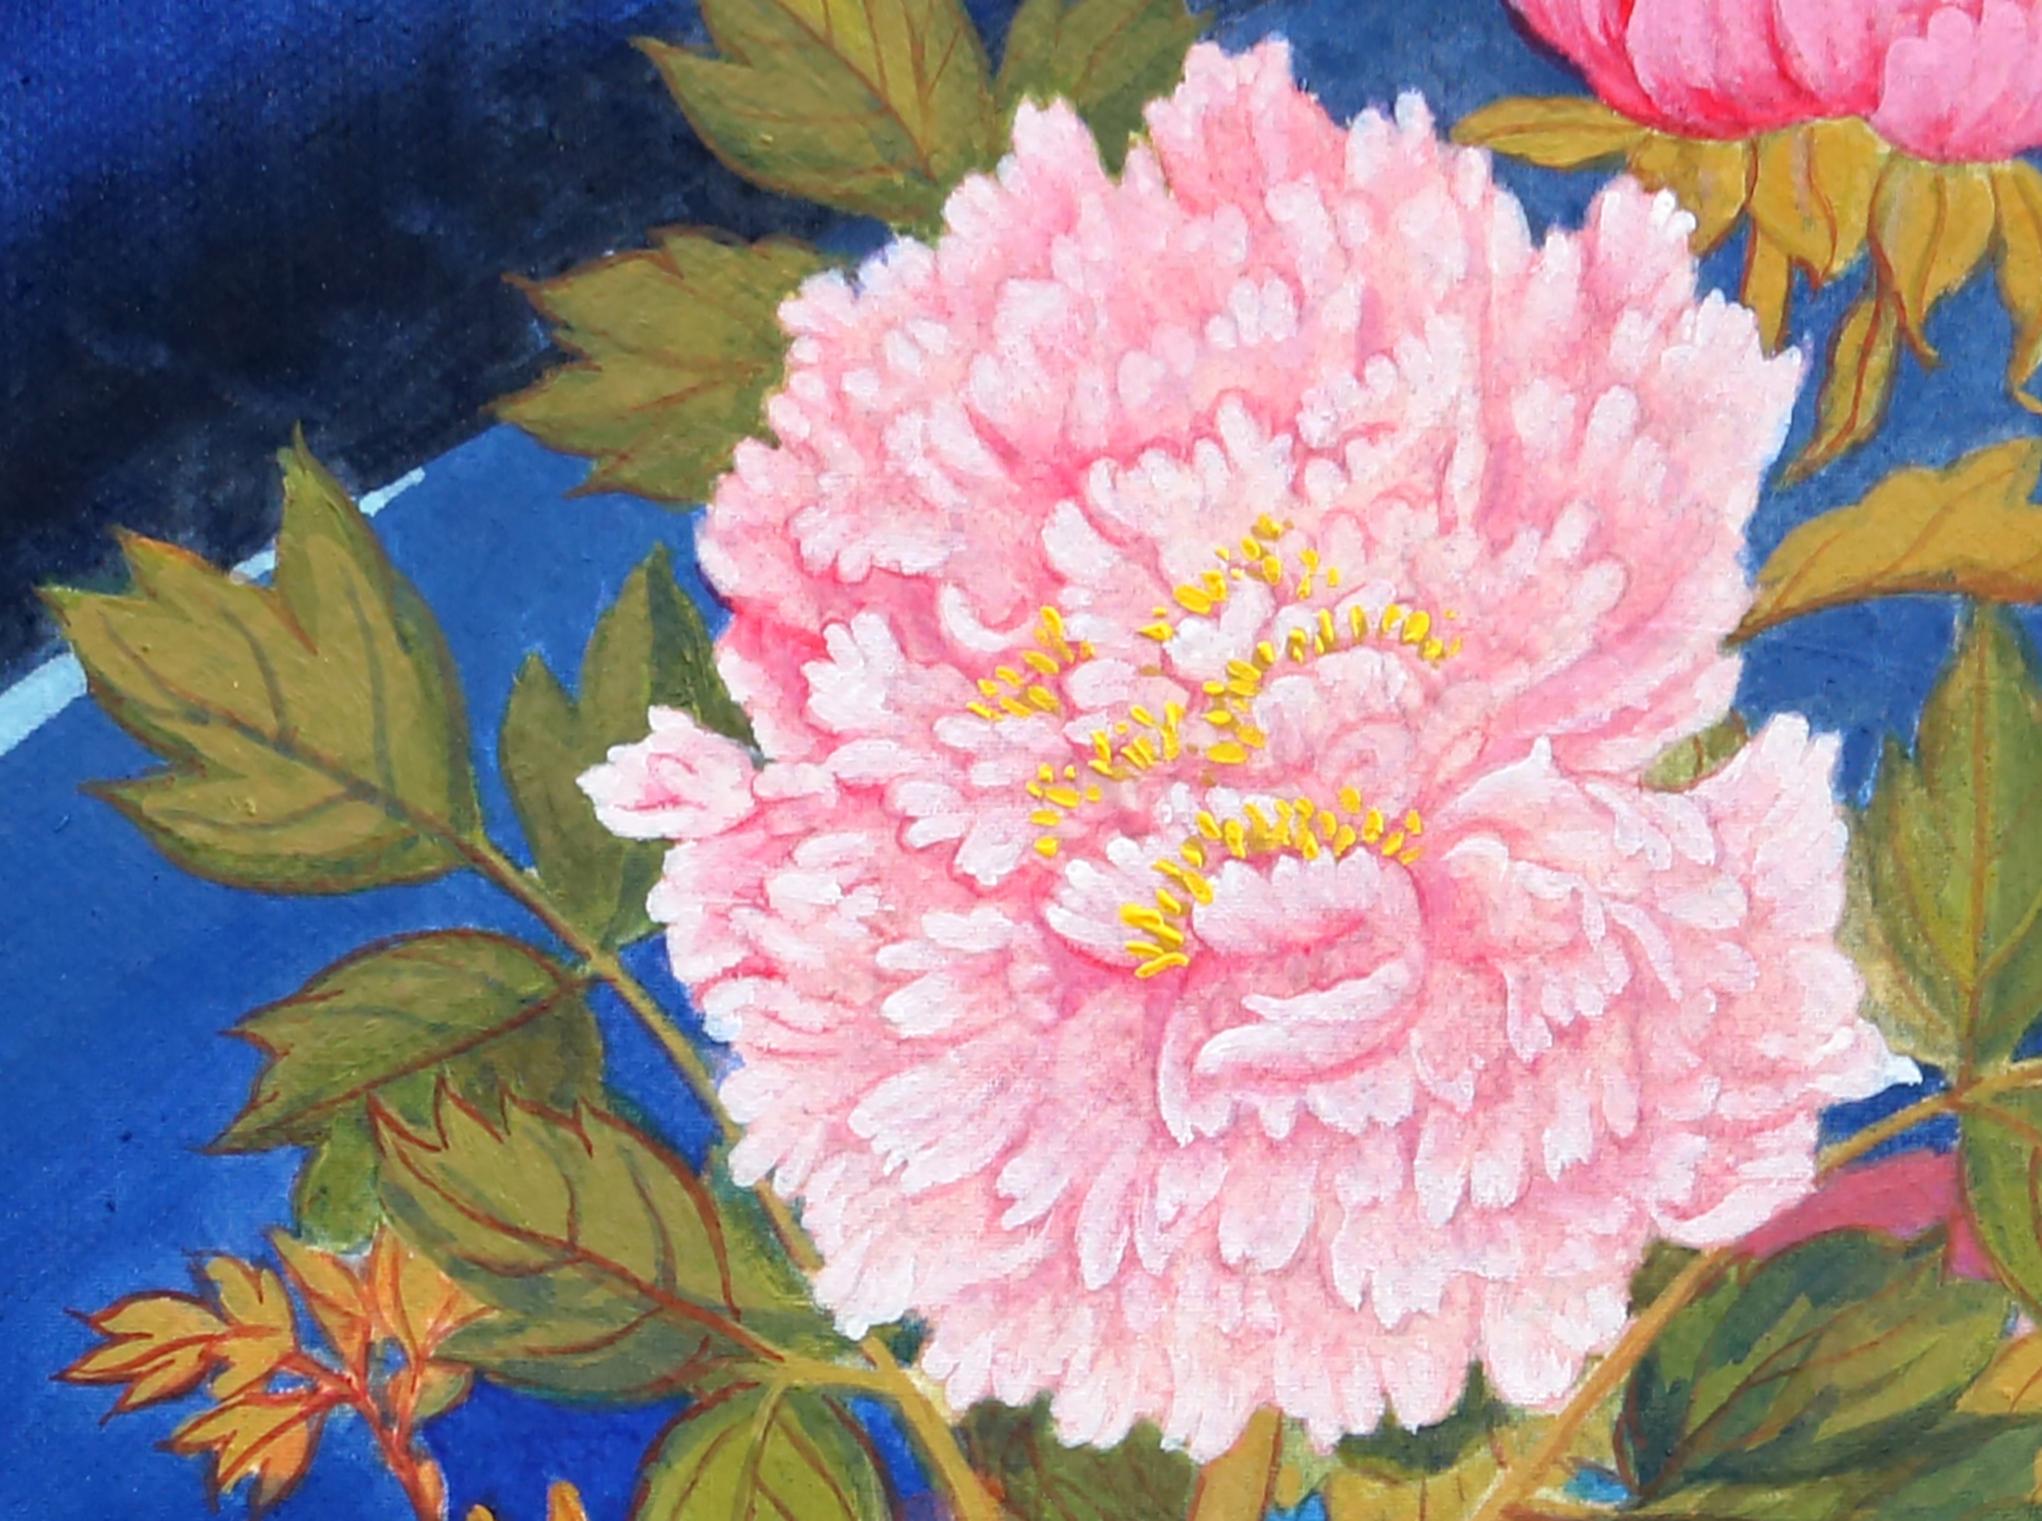 <p>Artist Comments<br>Artist Guigen Zha paints a realistic still life of blooming pink peonies. He places the vibrant flowers in a vase, softly lit by the night sky. 